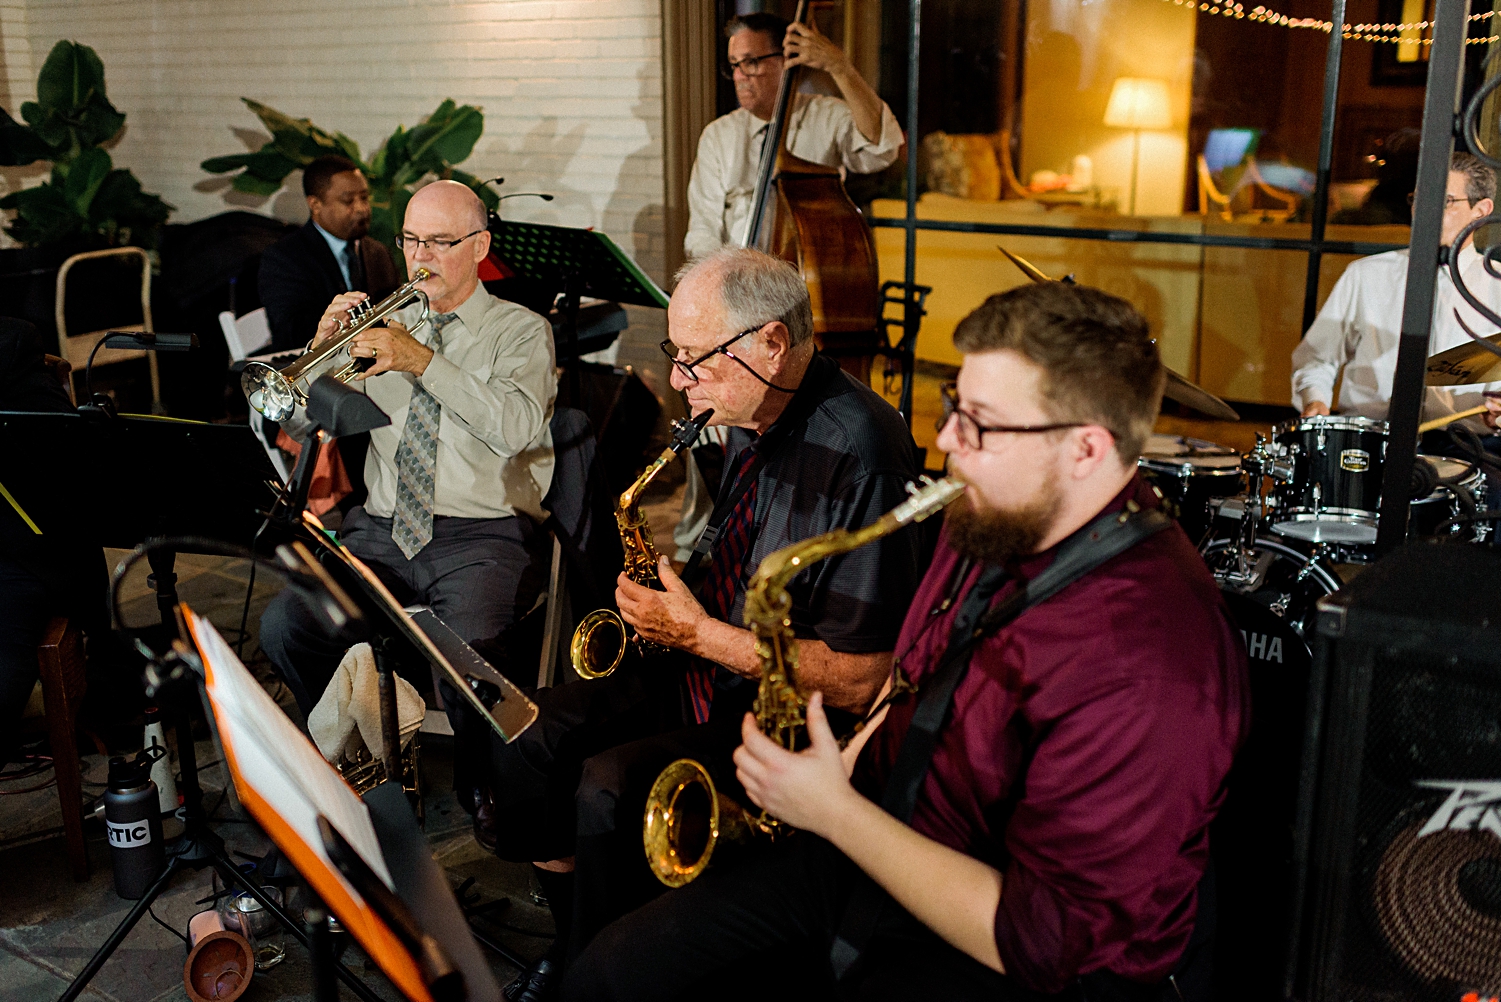 band horn section playing at wedding reception